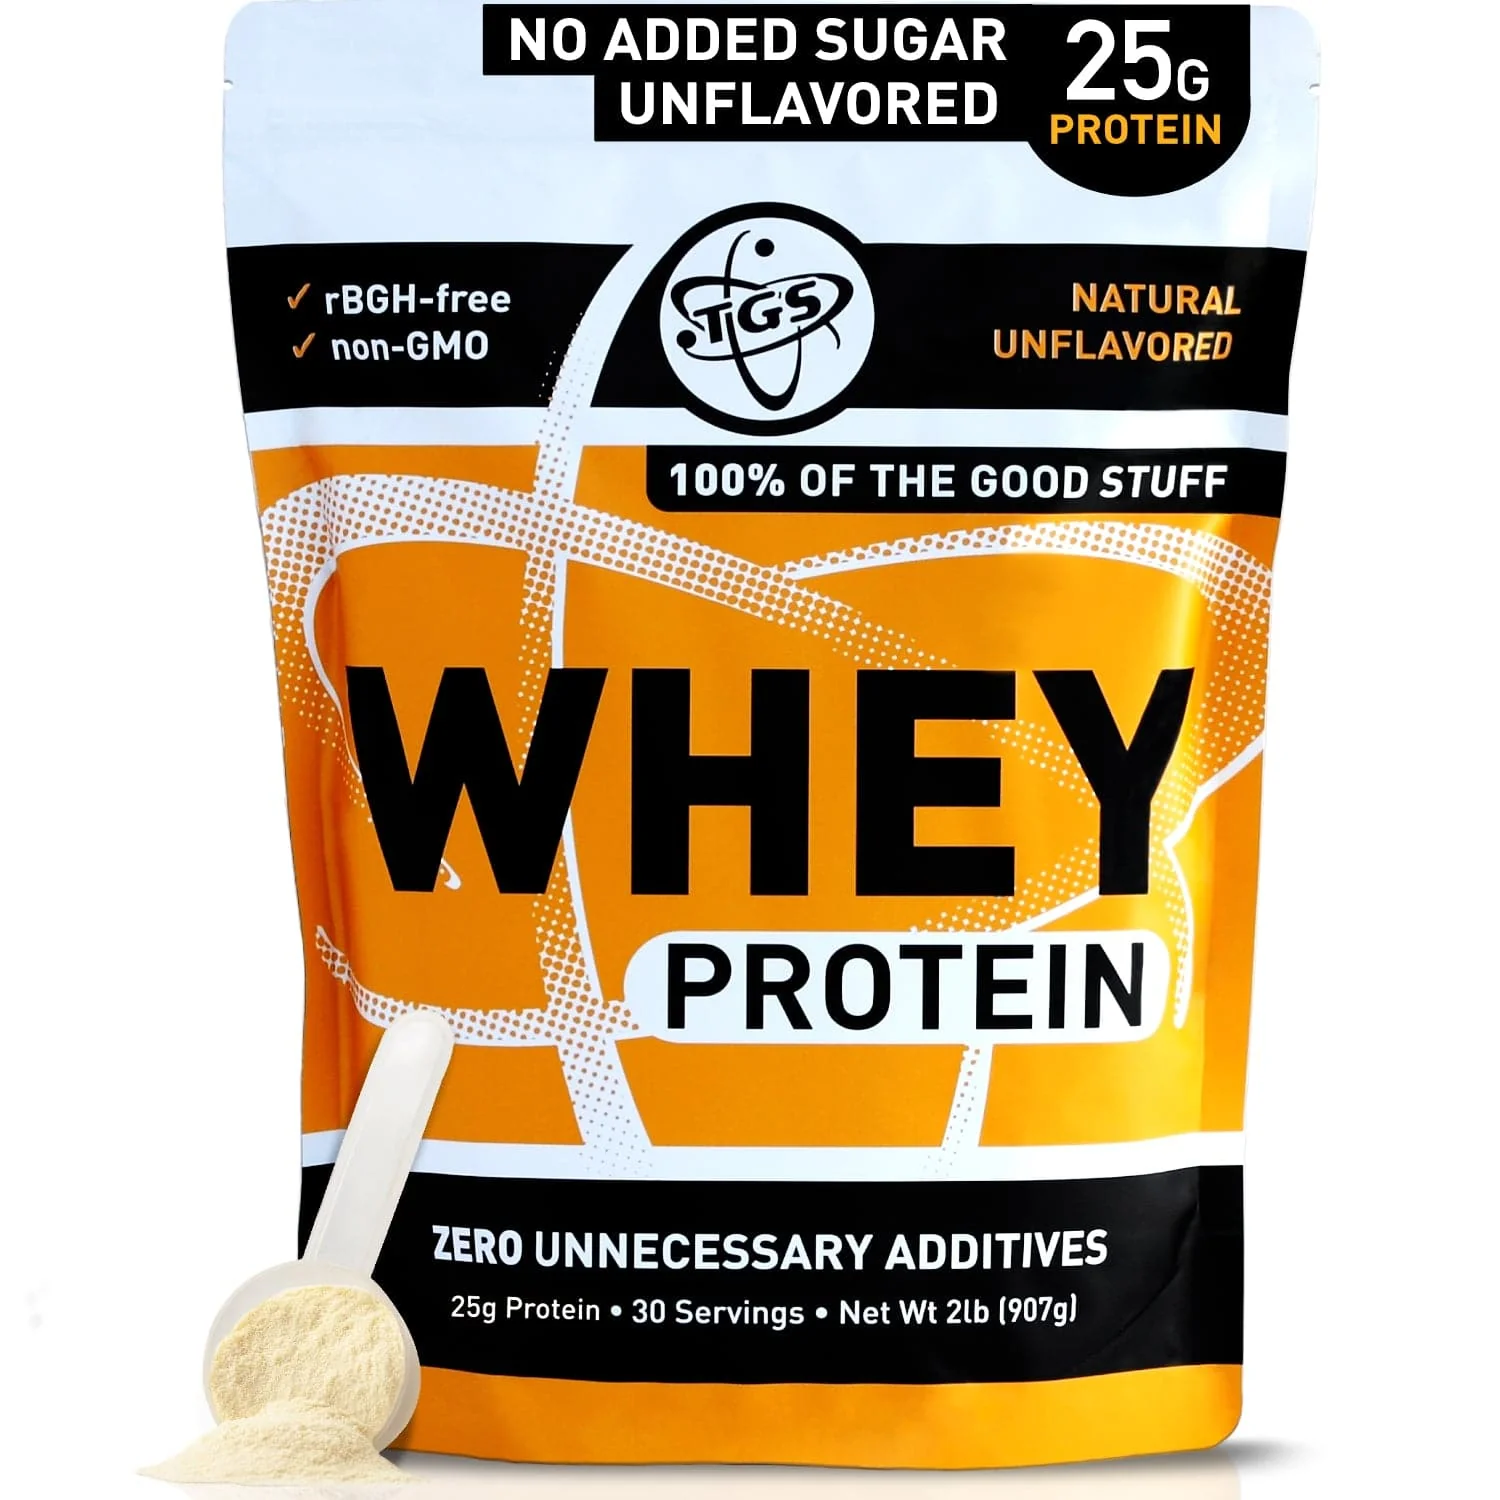 A photo of a pouch of TGS All Natural 100% Whey Protein Powder.